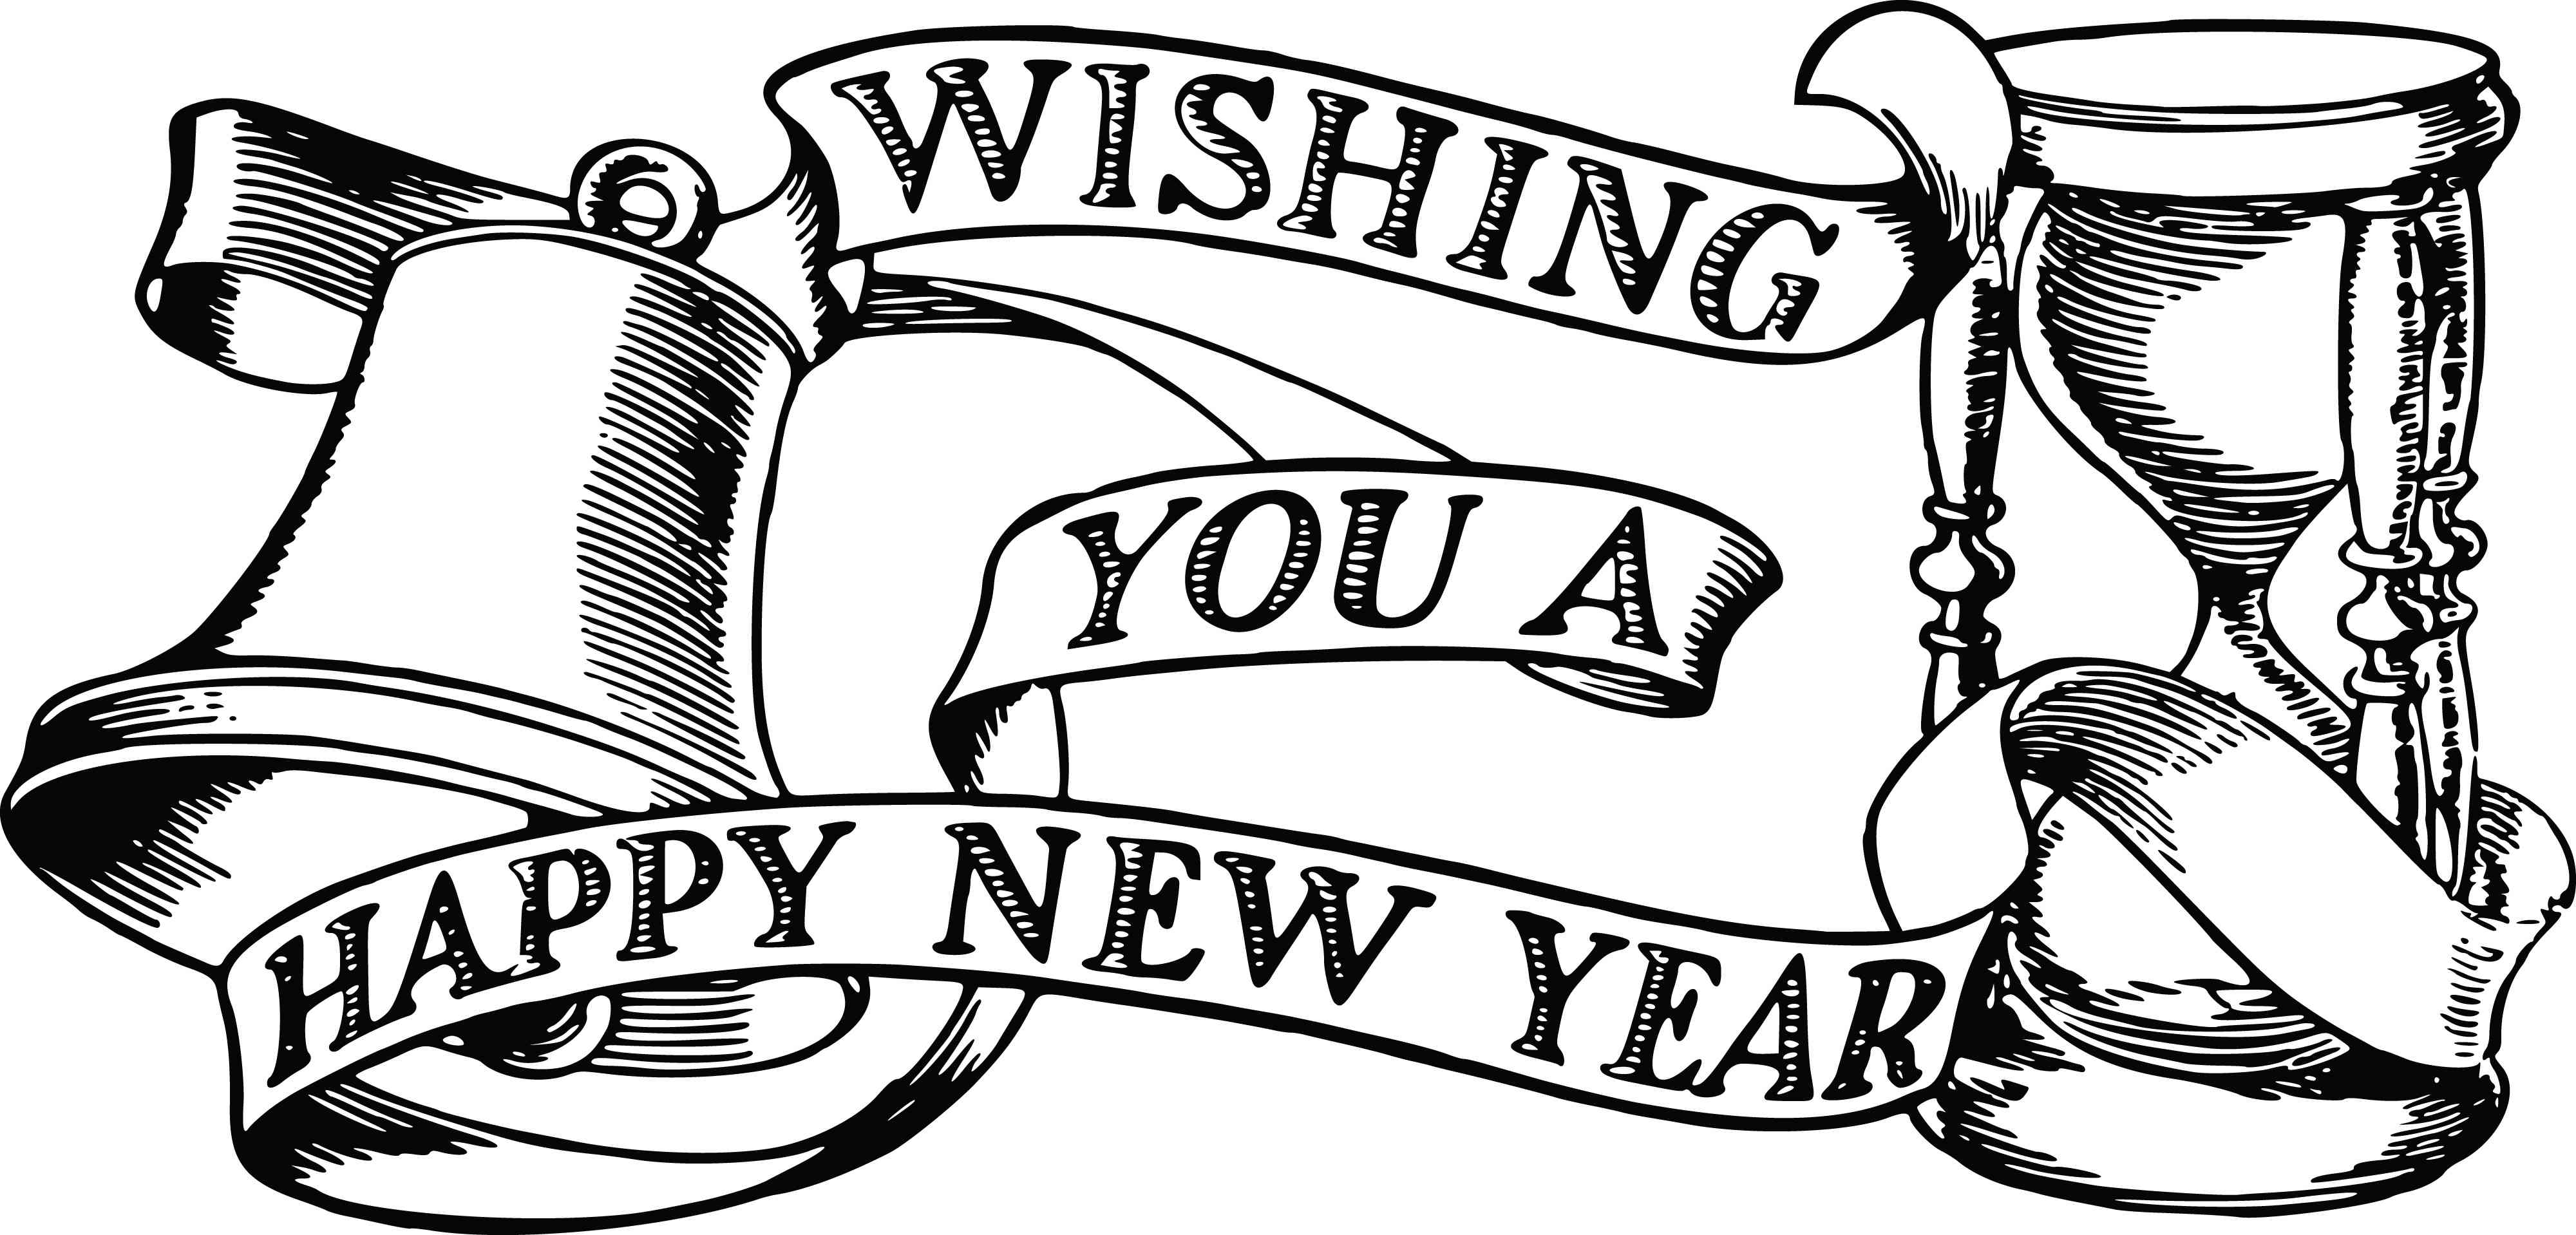 Happy New Year Free Clipart | Free download on ClipArtMag